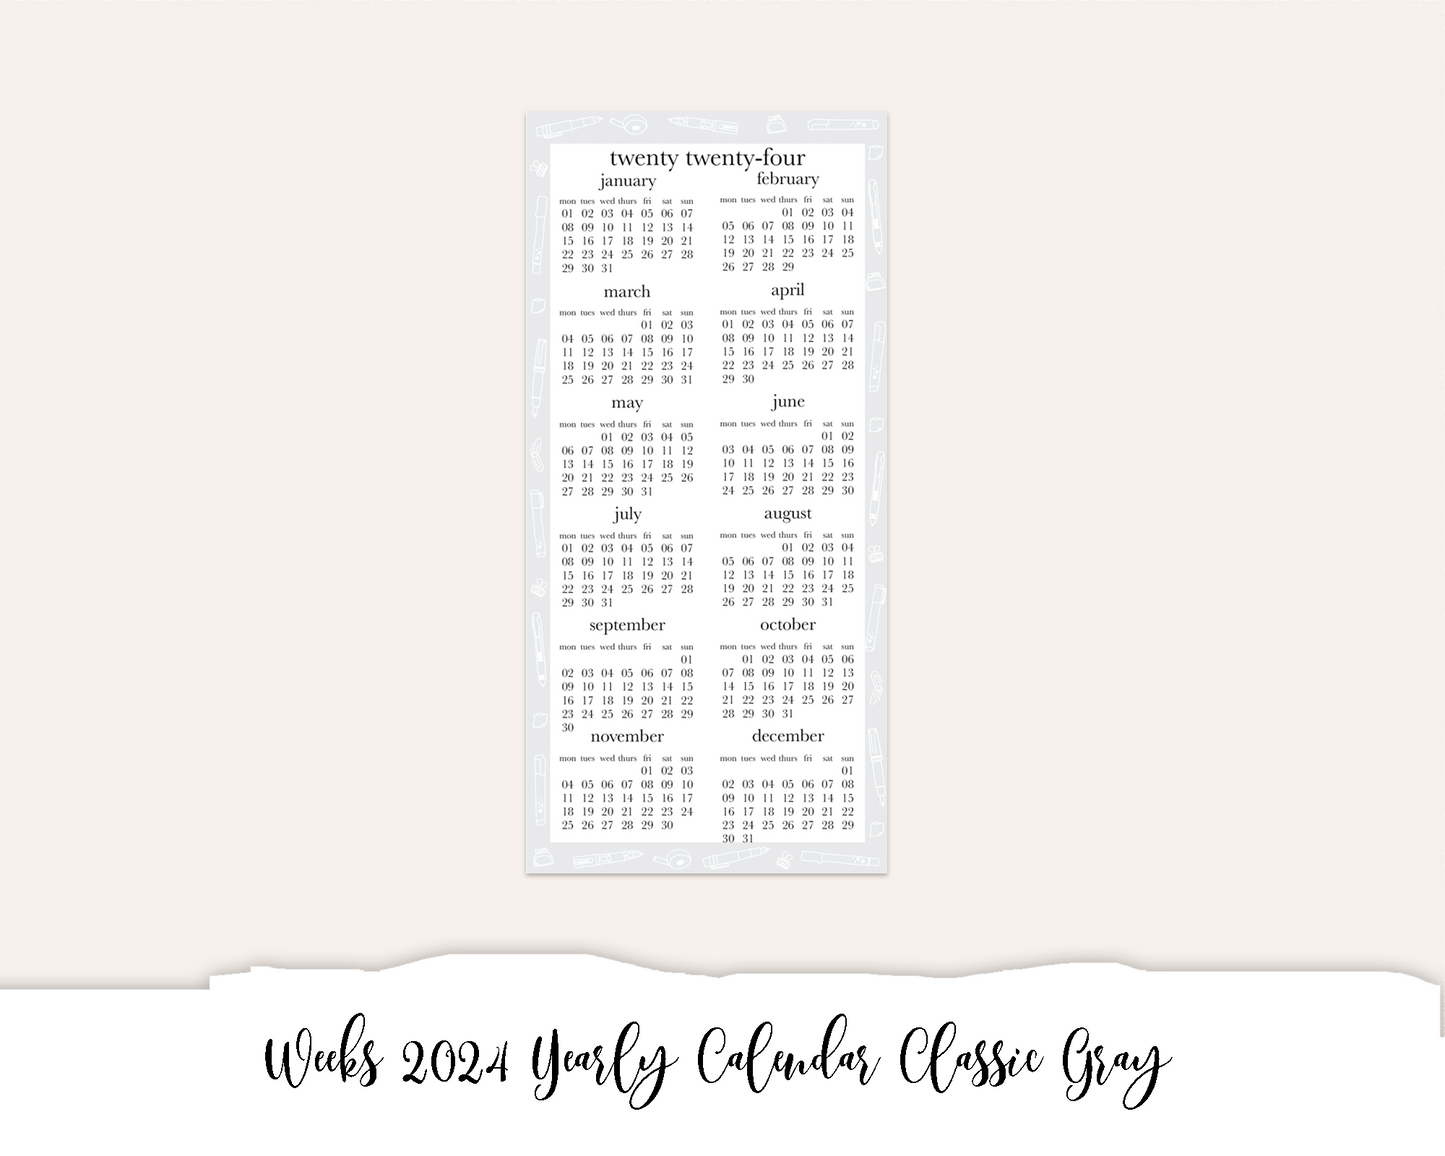 Weeks 2024 Yearly Calendar Classic Gray (Full Page Printable Stickers)